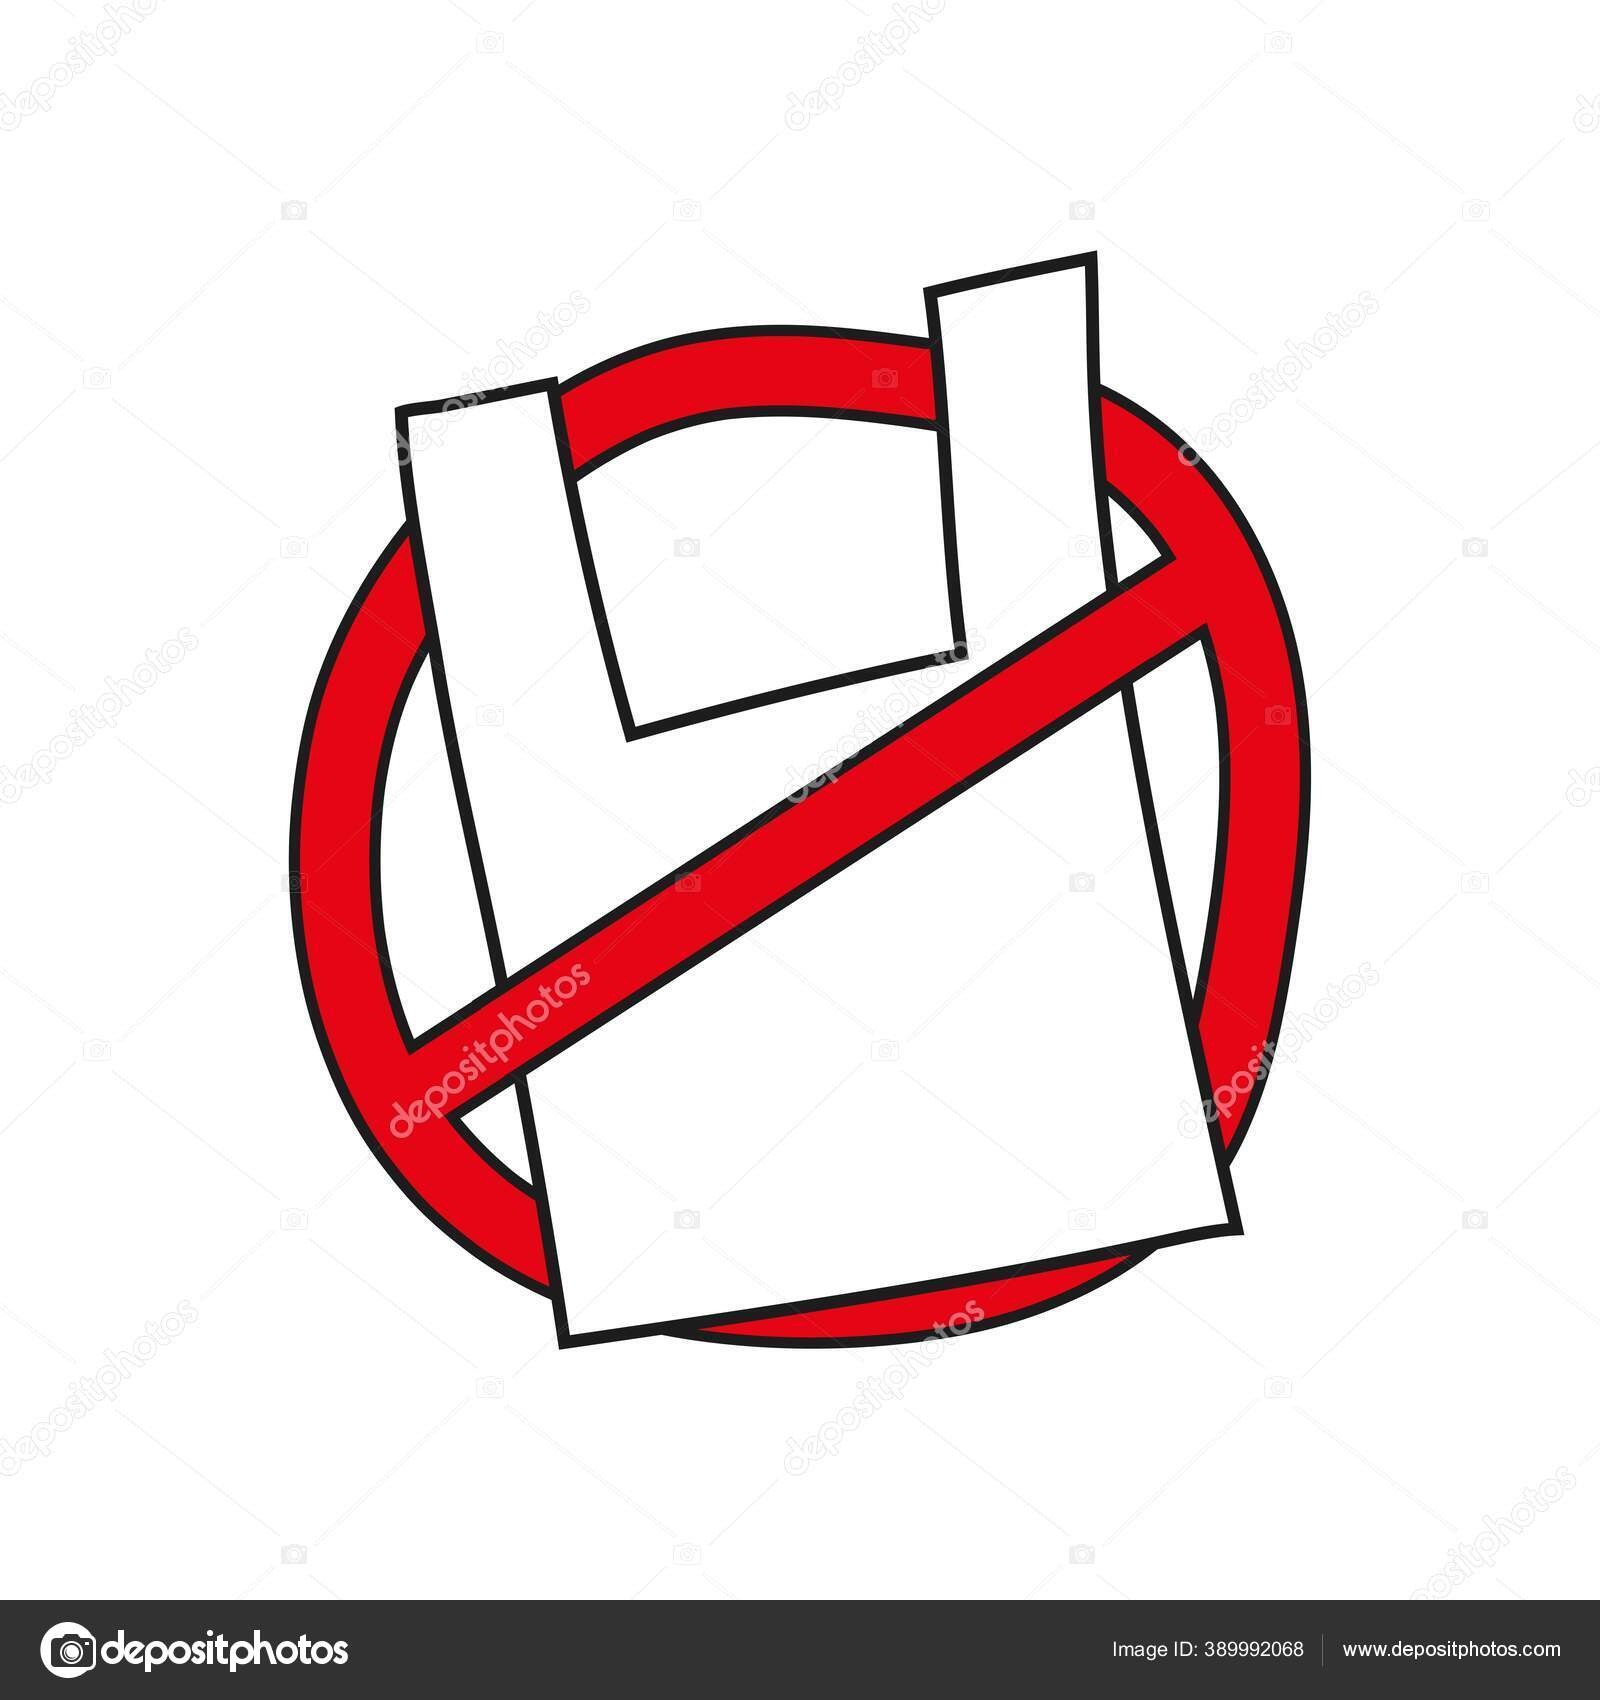 The Cross Sign Of Say No Plastic Bags Forbidden Campaign Reduce Global  Warming Concept Stock Illustration - Download Image Now - iStock